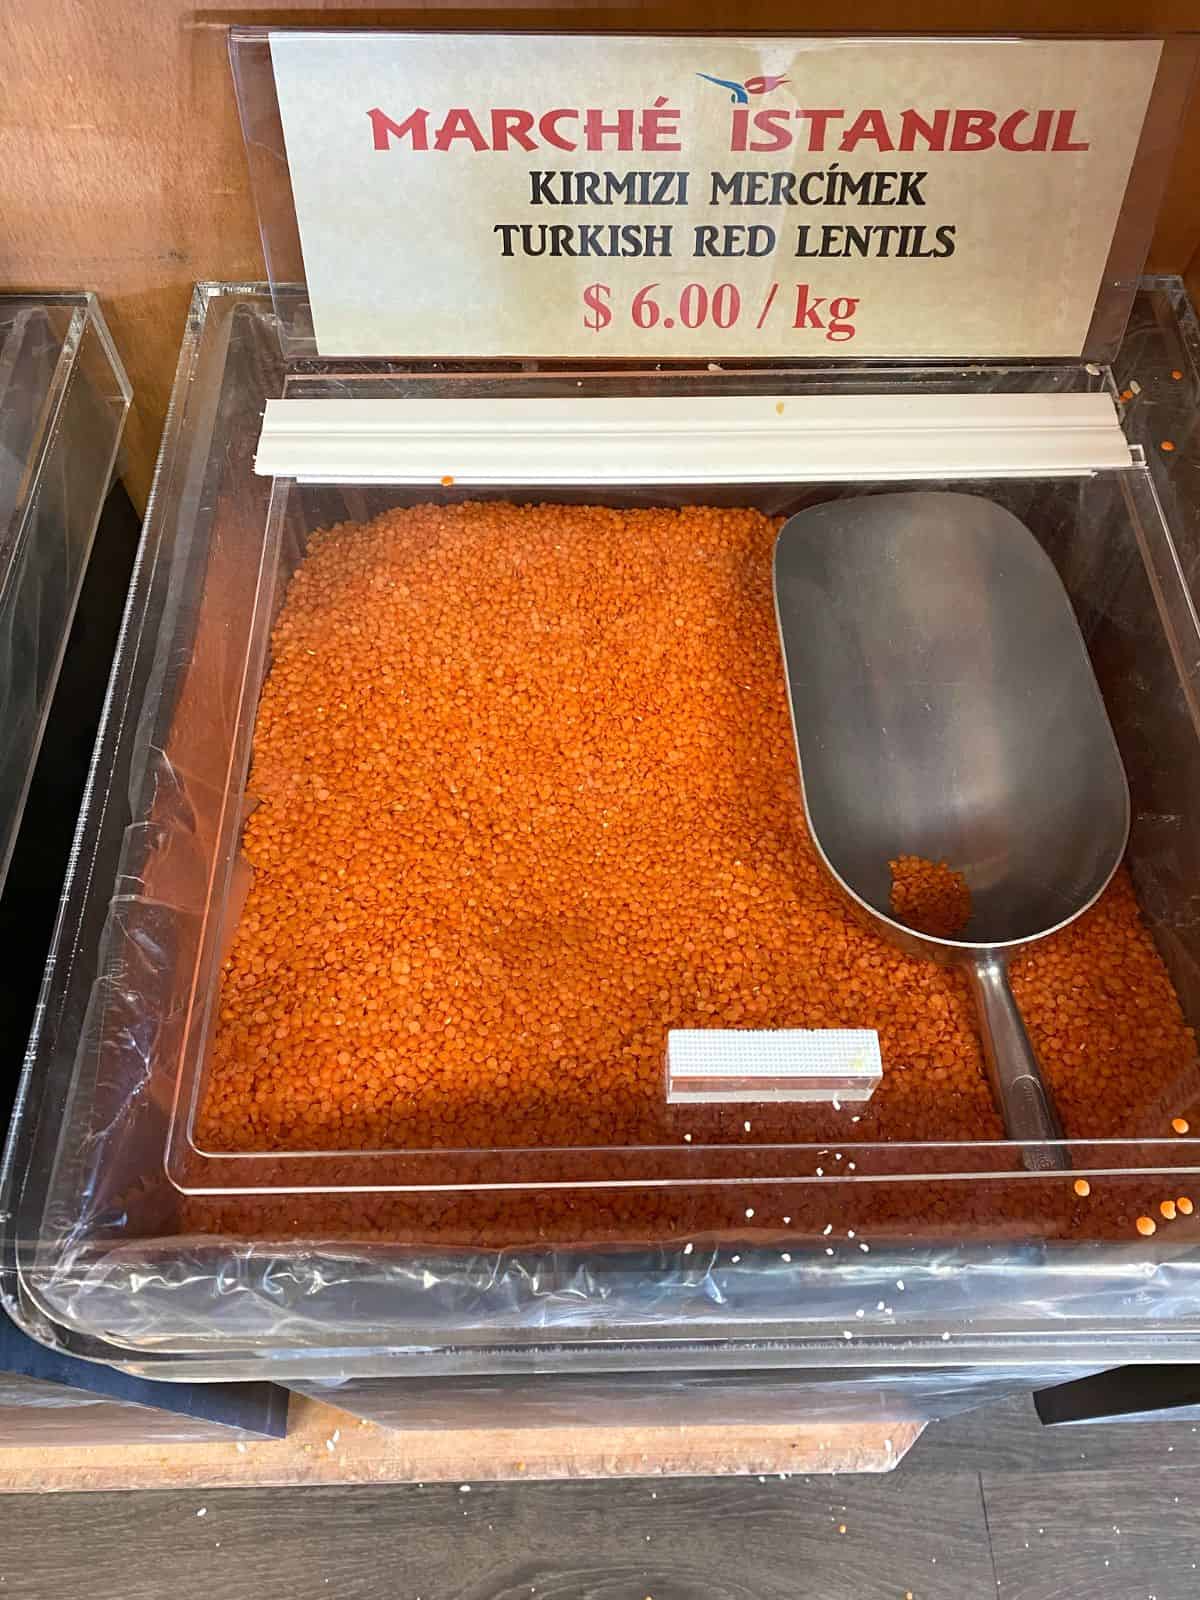 An image of a bin of Turkish red lentils.